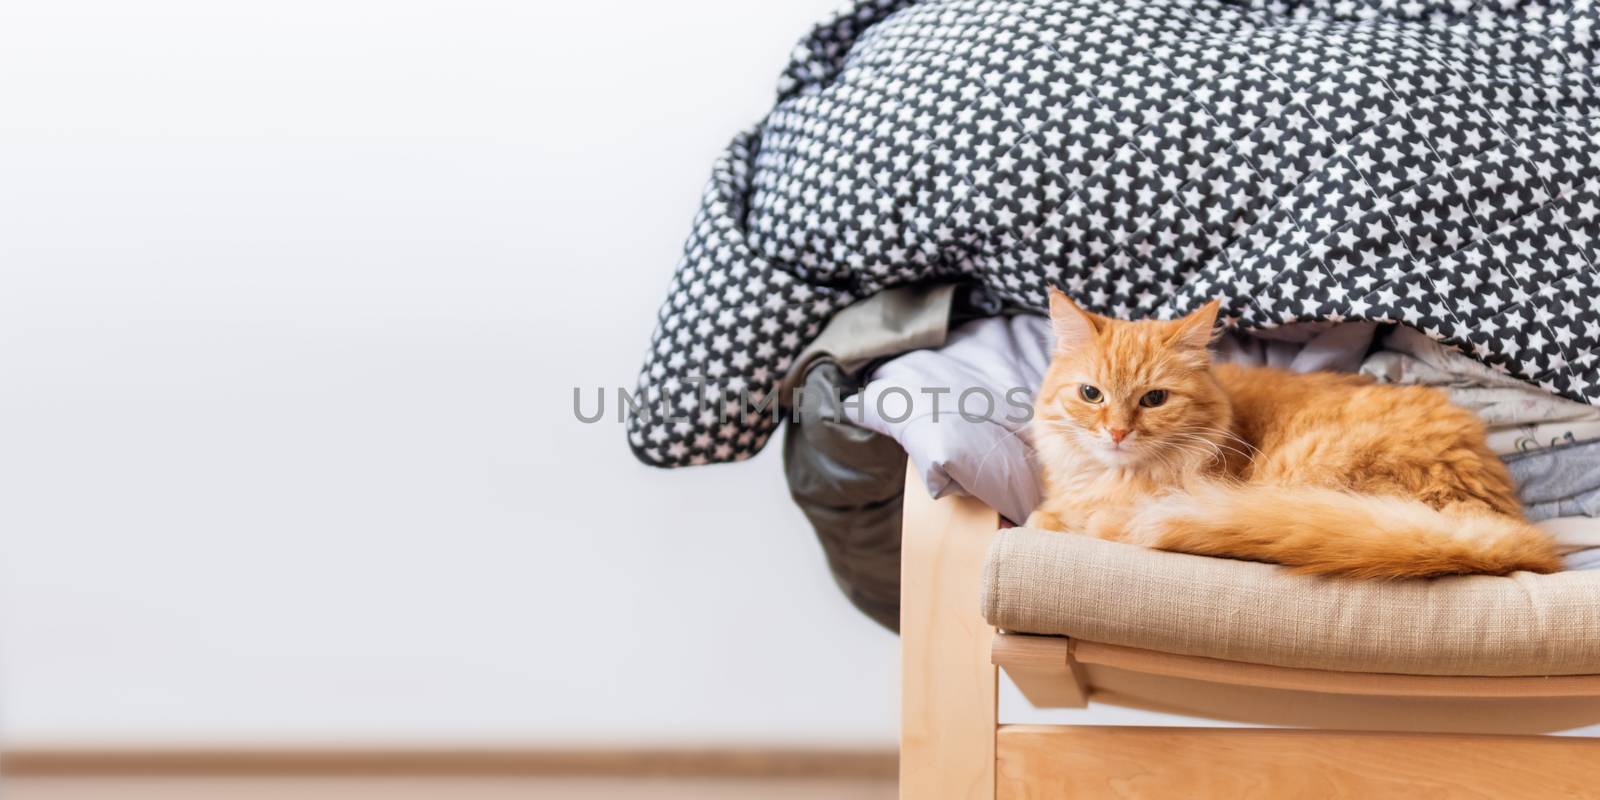 Cute ginger cat is lying on beige chair. Pile of crumpled clothes behind fluffy pet. White background with copy space.